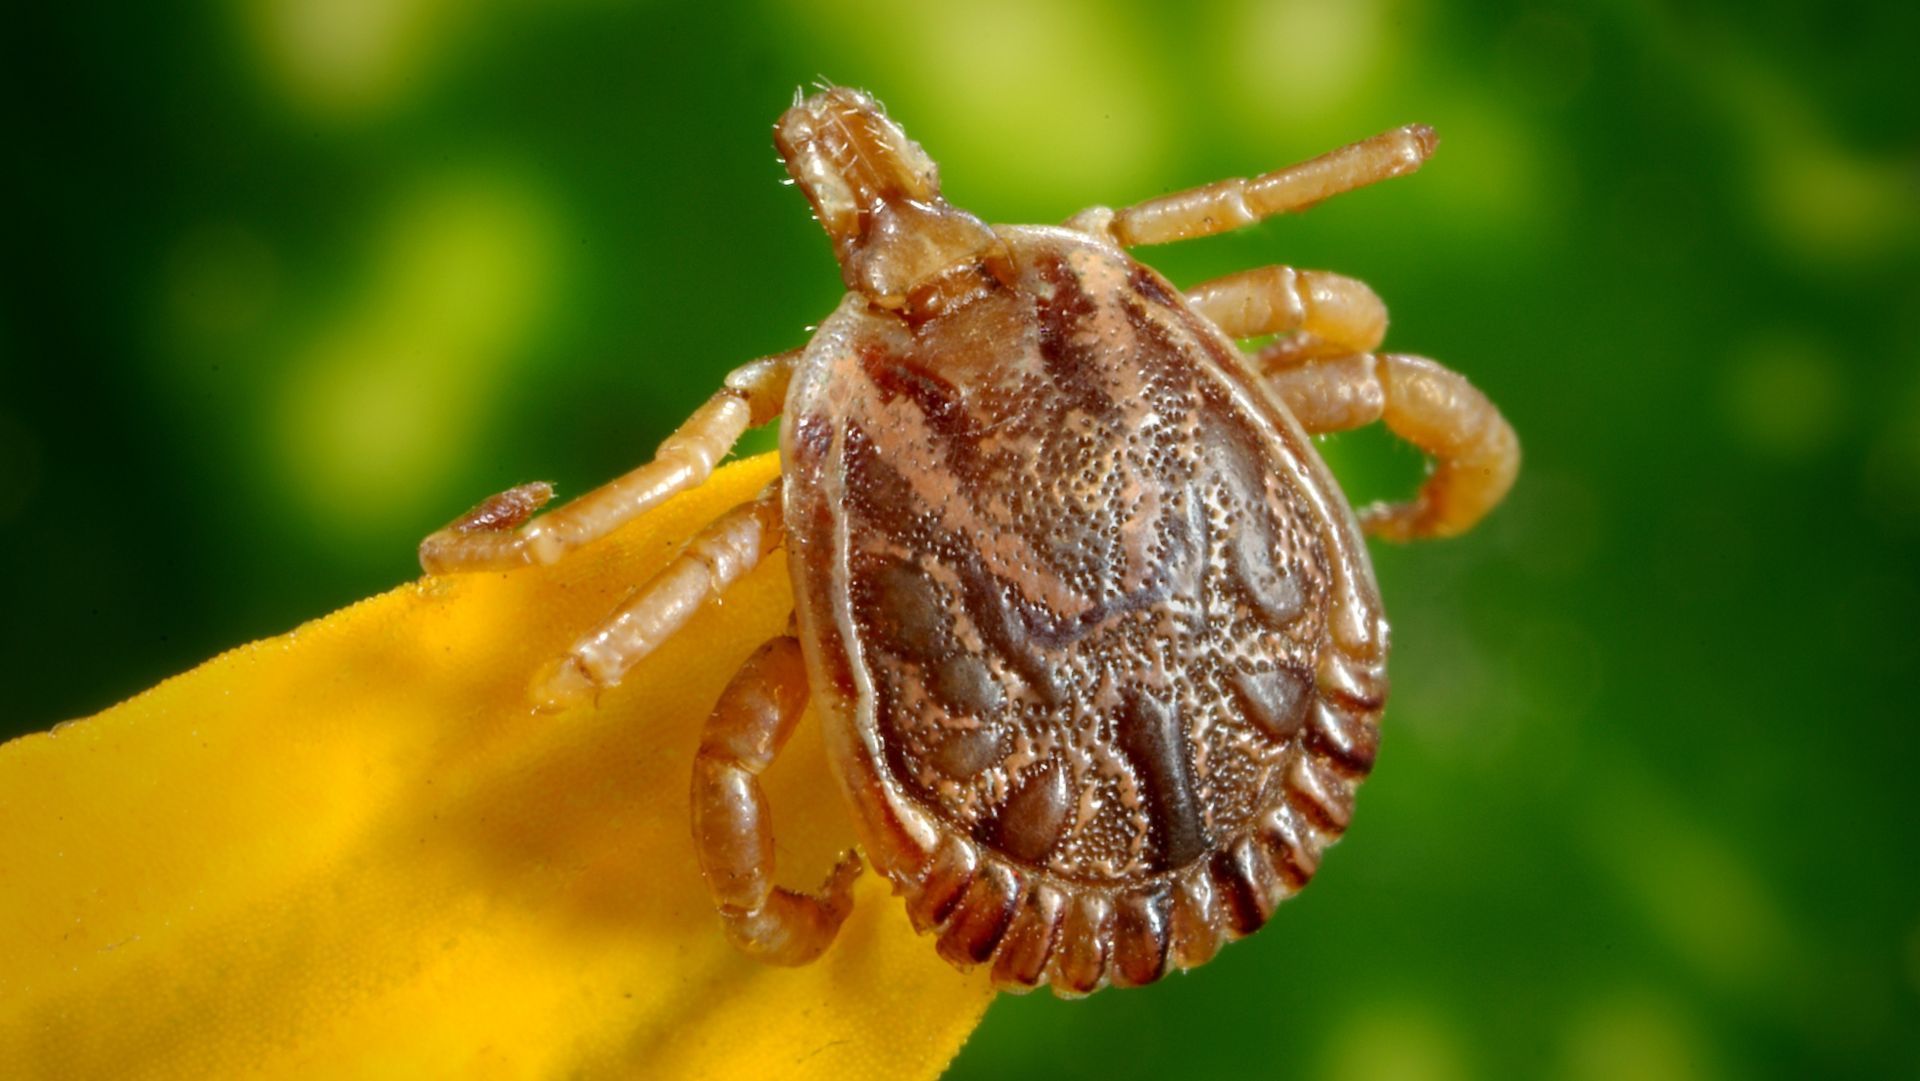 Tick bite: these are the symptoms of Lyme disease